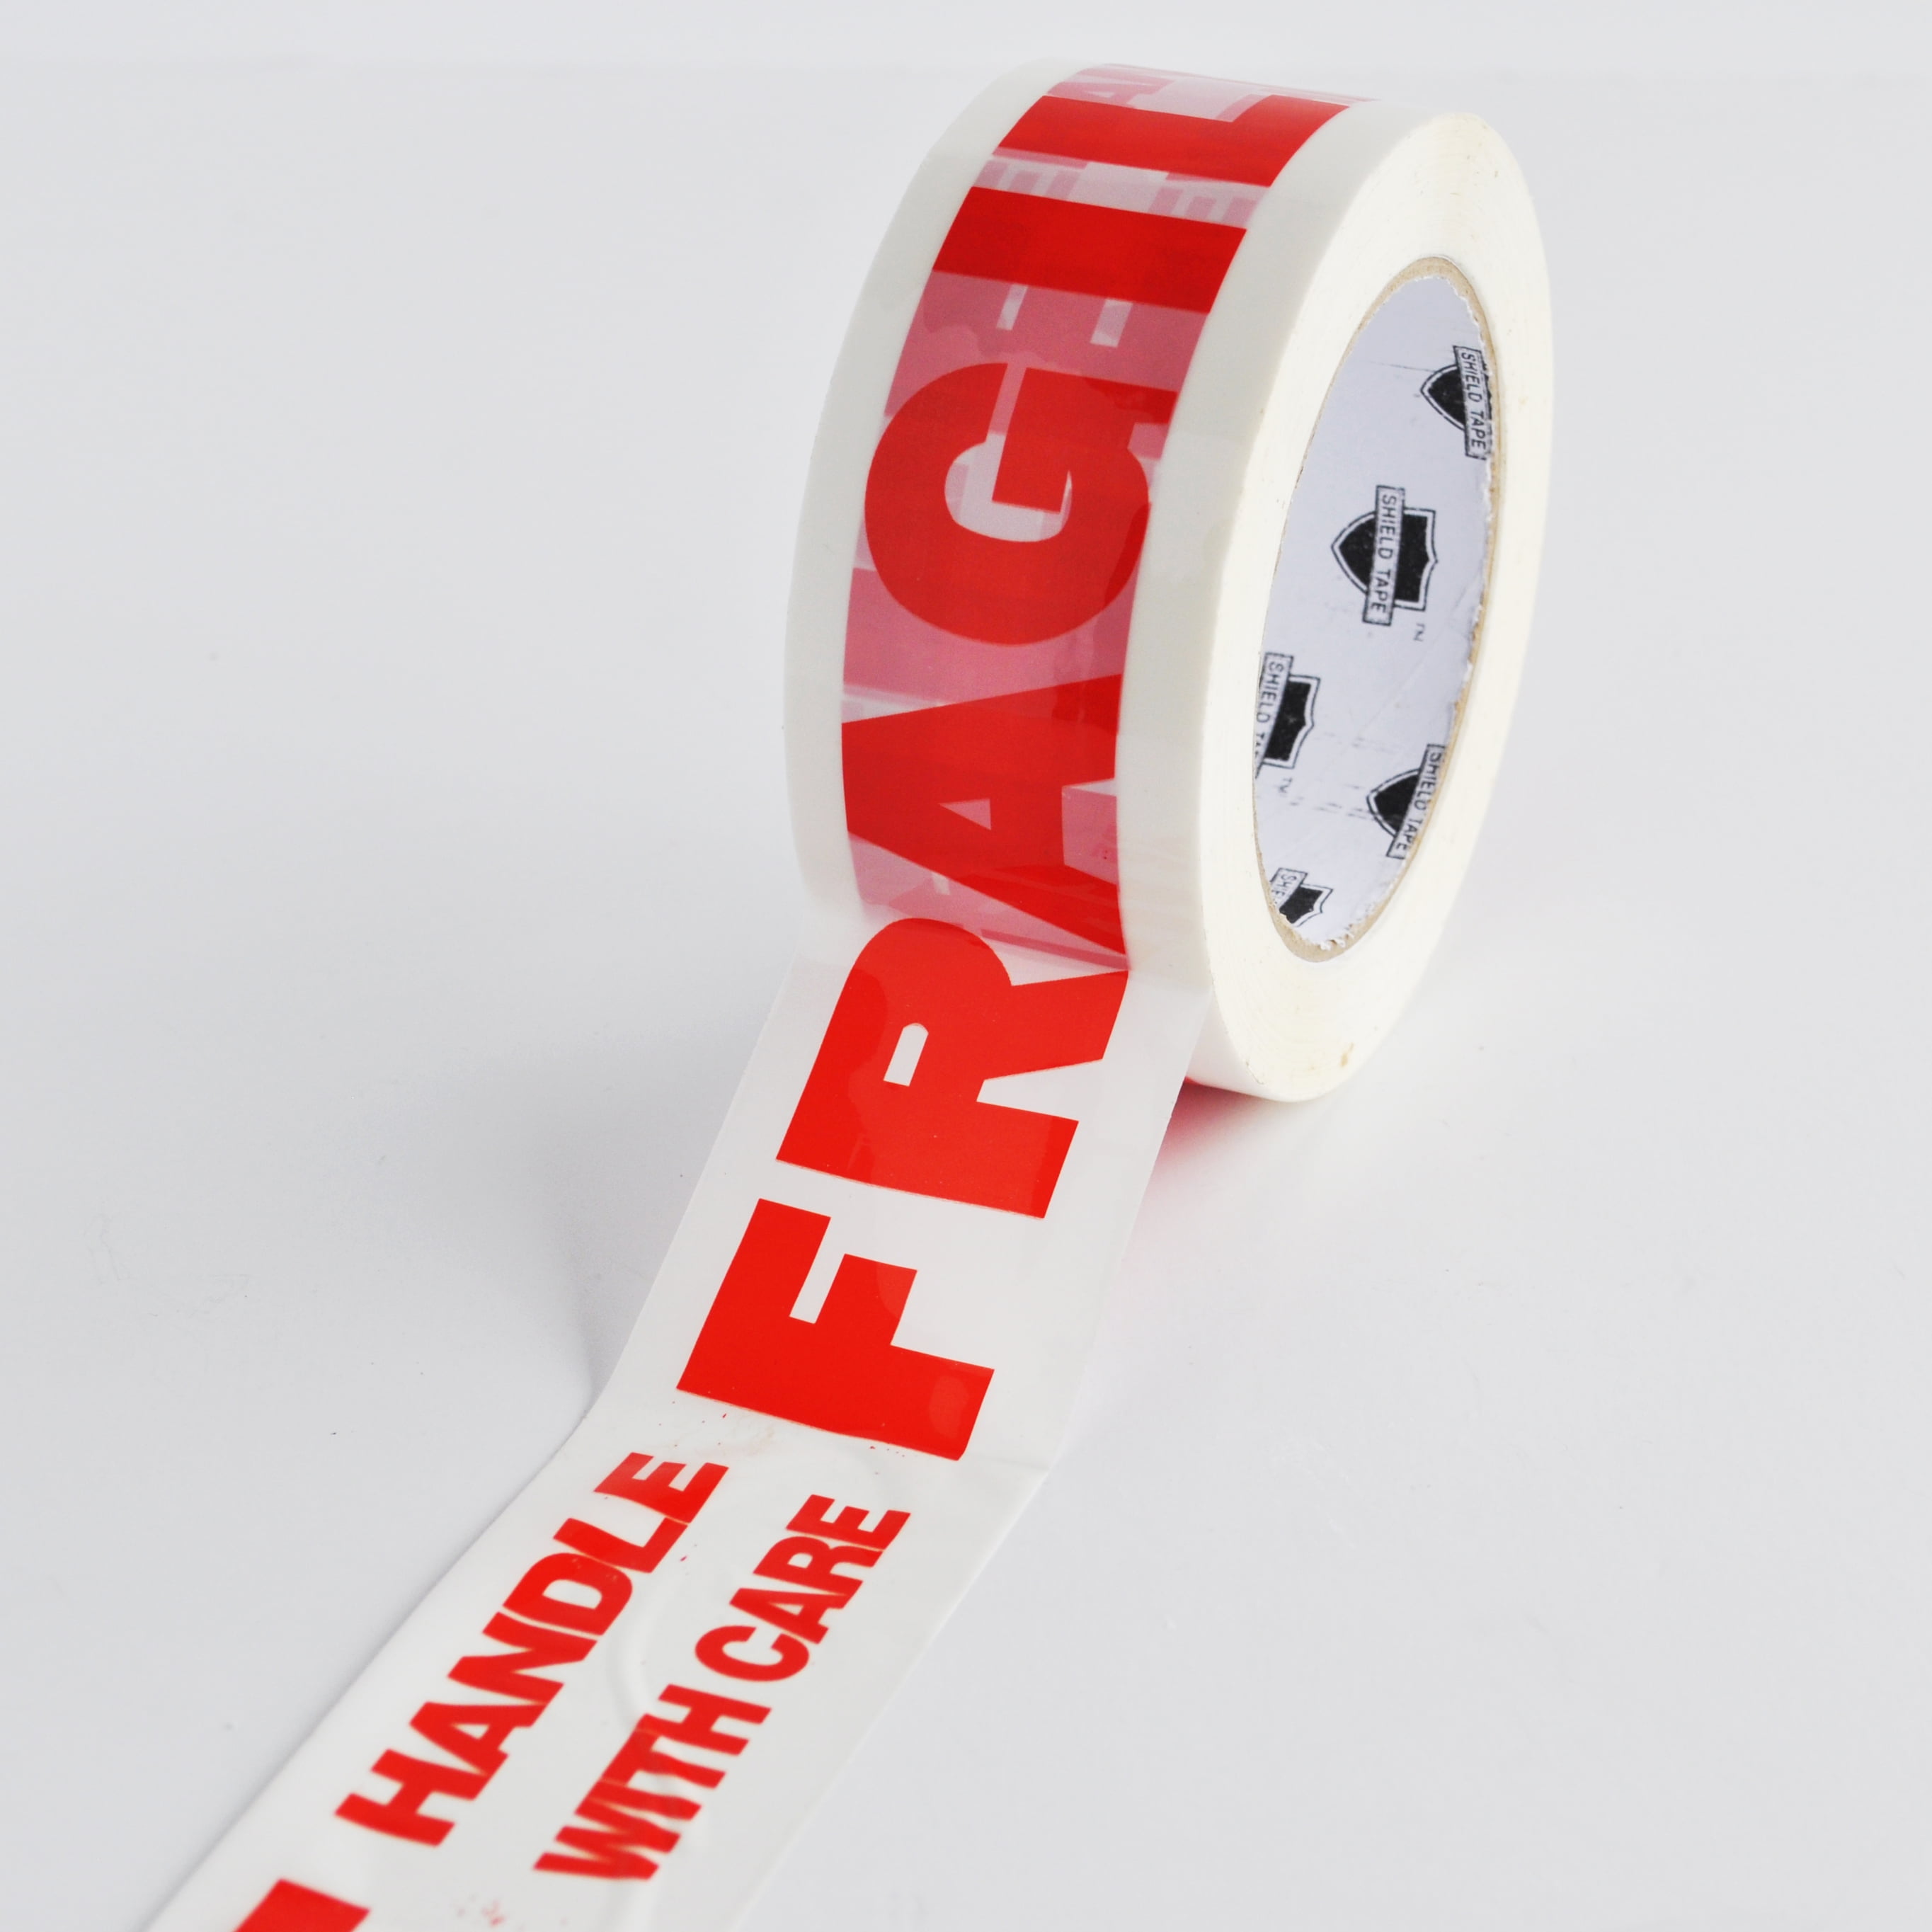 Fragile Printed Strong Parcel Packing Box Sealing Tape 48mm x 66m Pack of 2 